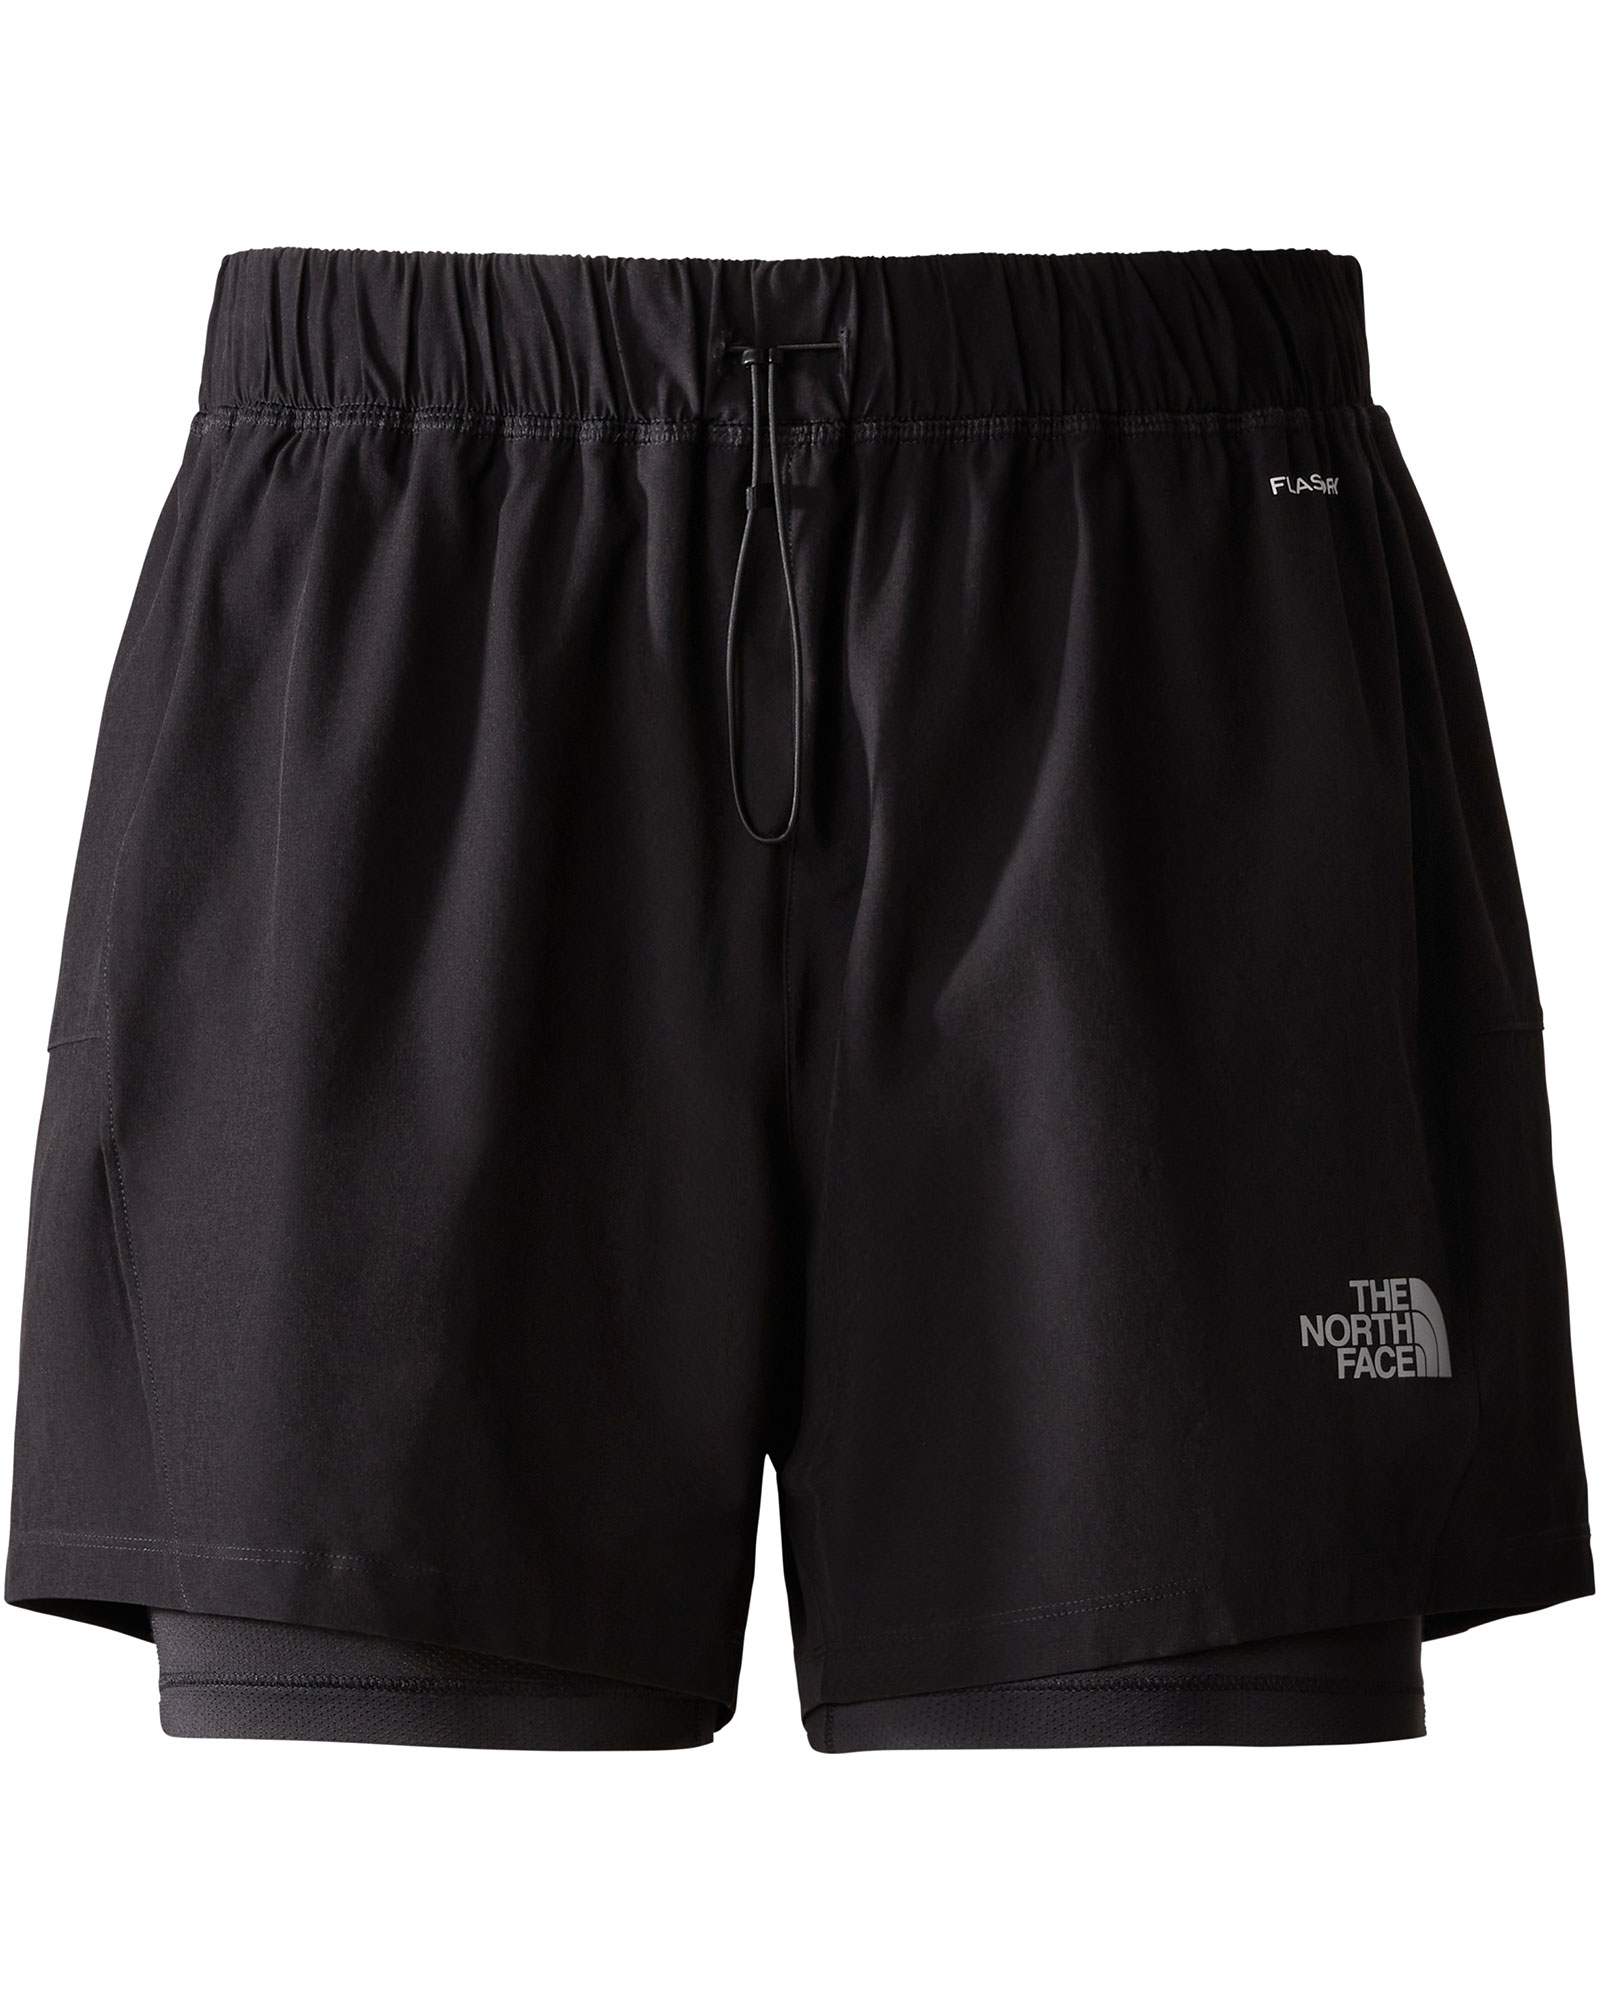 The North Face Women's 2in1 Shorts 0